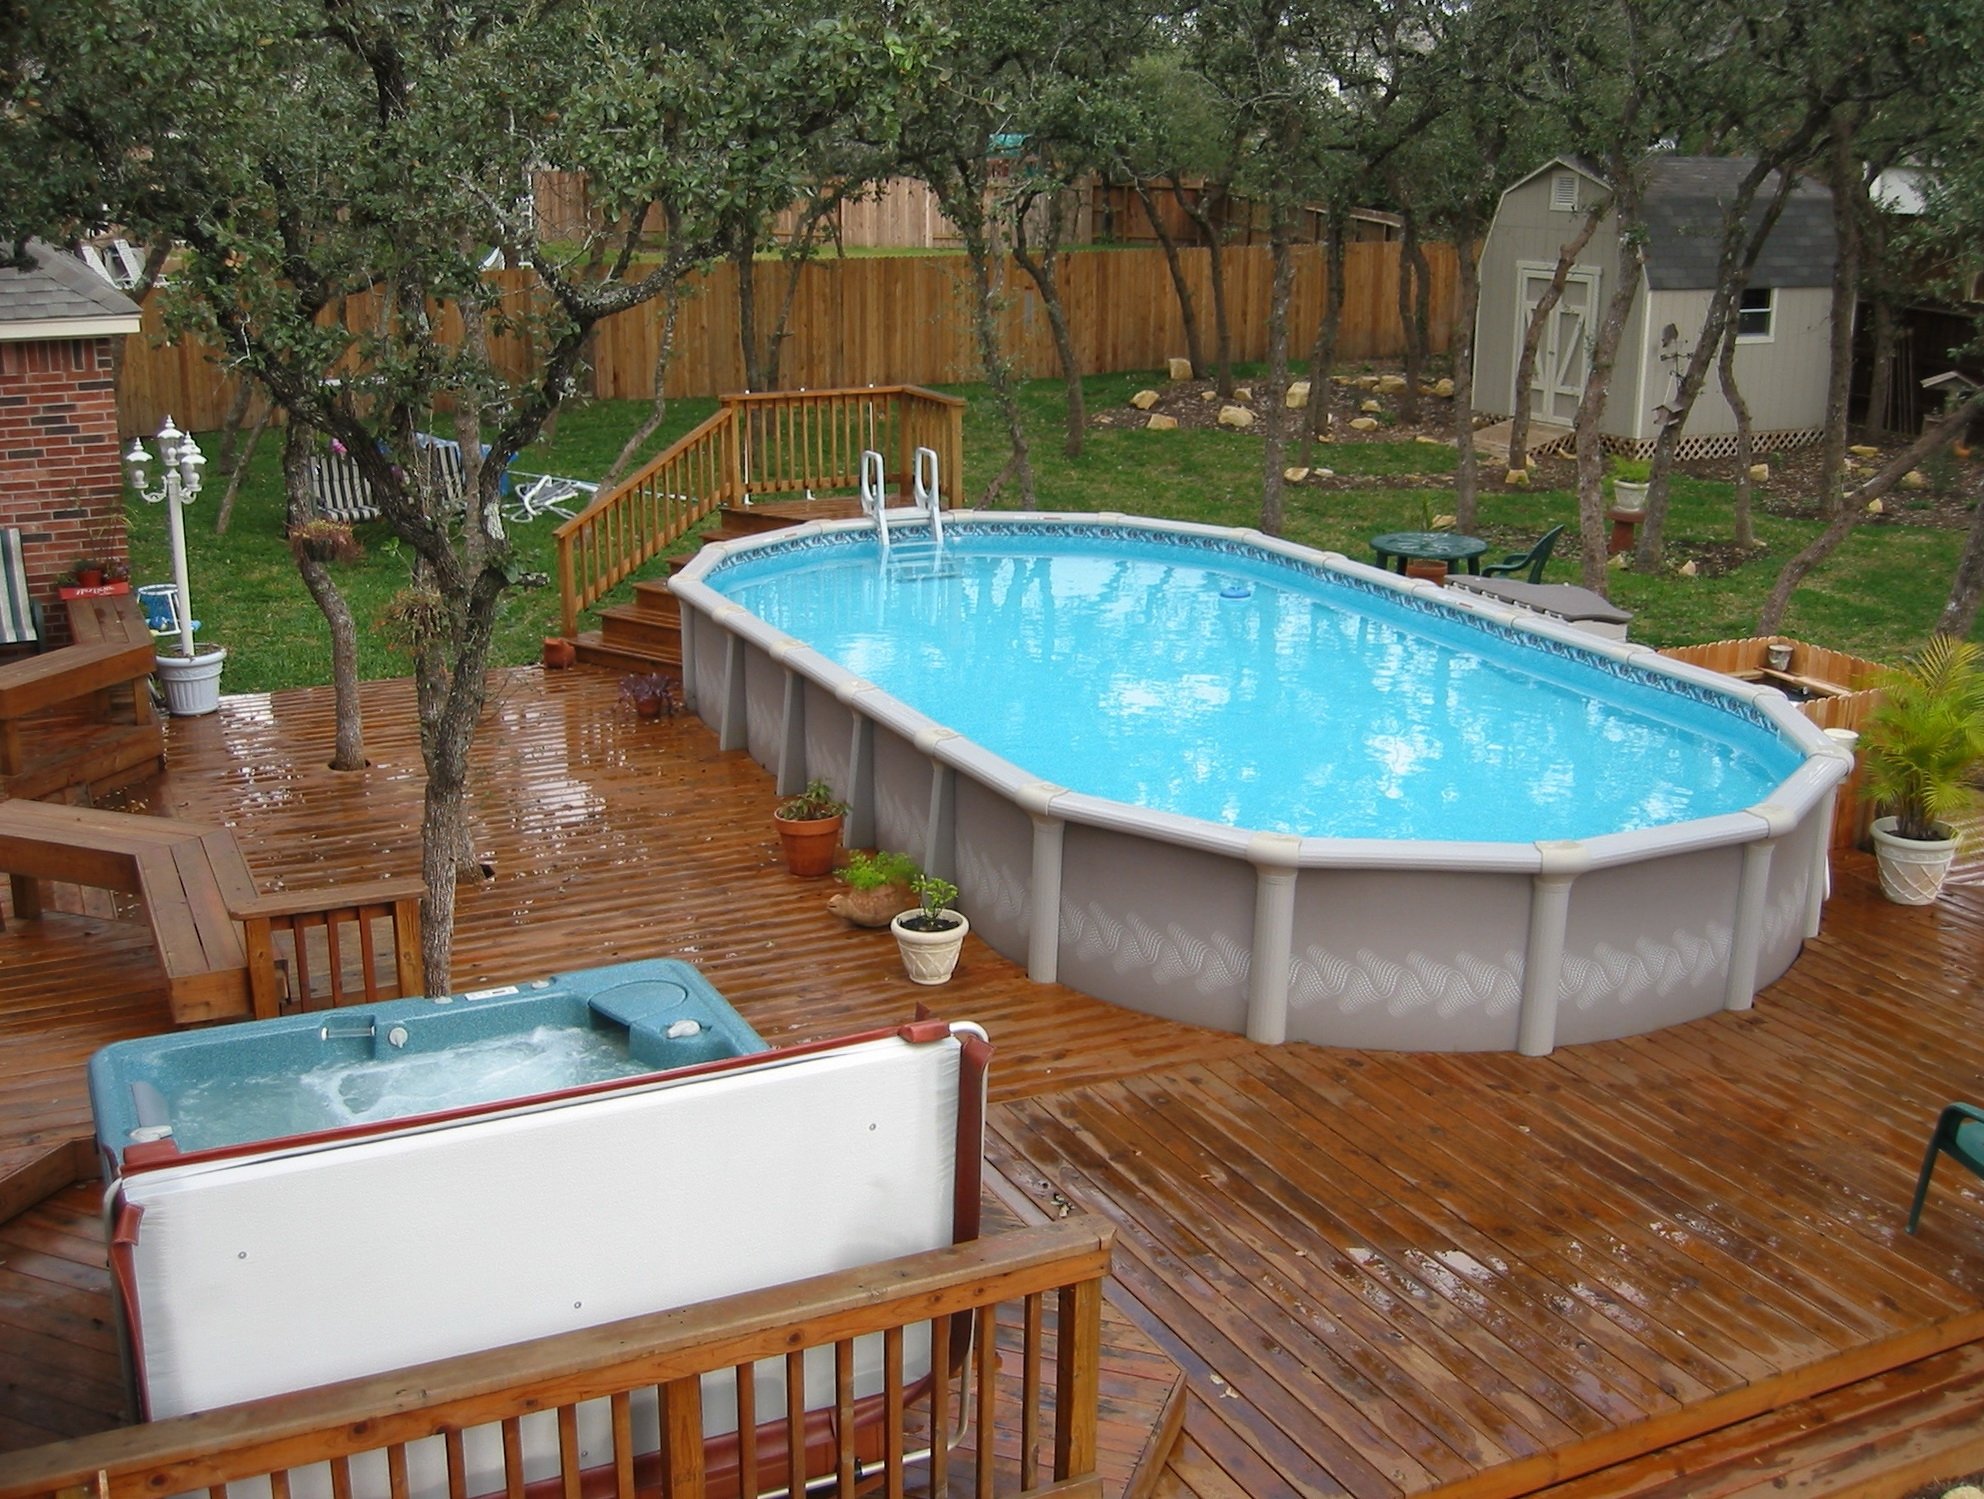 Creatice Above Ground Swimming Pool Deck Ideas 